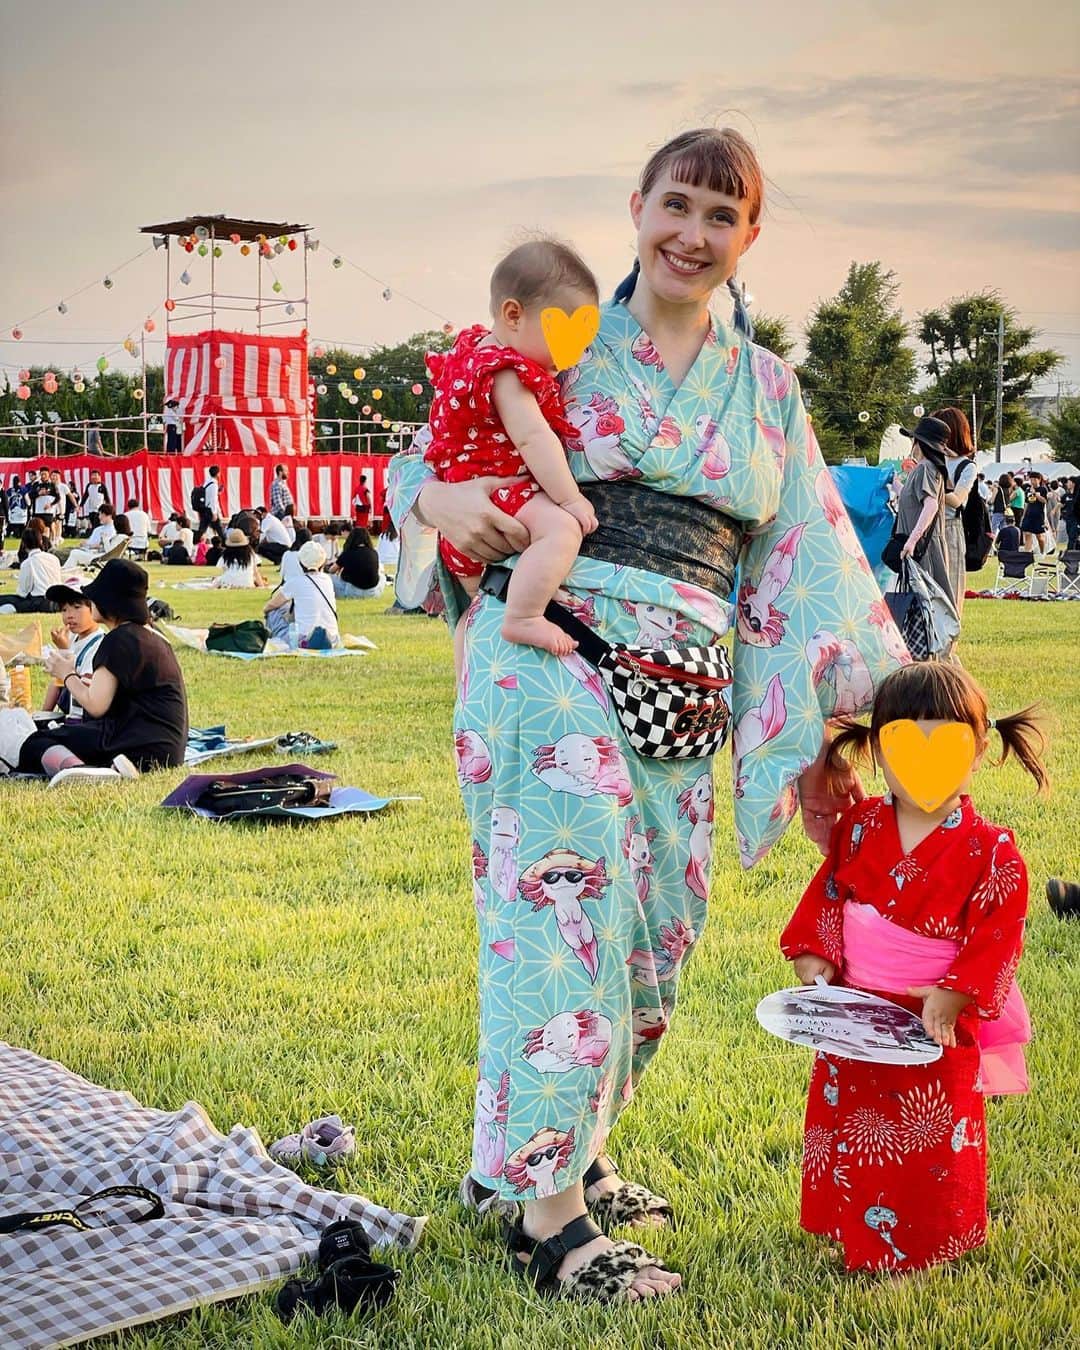 Anji SALZのインスタグラム：「Summer is here in all its glory 🎆👘🏮🎐 I look like a mess but had only 5 mins to get me and the kids ready and also baby wearing and breastfeeding so 😂😂 Wearing the @salzkimono Axolotl yukata though and got lots of compliments on it 😅💕 And a bum bag to keep my valuables because I wasn’t sure how crowded / hectic this summer festival would be.   Do you like fireworks or don’t care much?   夏が来たああー🎐👘🎆🏮💕 おんぶや授乳してるから、かなりぐちゃぐちゃだけど、@salzkimono のオリジナル ウーパールーパー浴衣でお出かけ。人混みは心配で貴重品をウエストポーチに😅  お祭りは好き？今年はどこかに参加しますか？  #summer #yukata #japanesesummer #japanesefestival #axolotl #kidskimono #japan #tokyo #bonodori #familyouting #summerkimono #japanesekimono #浴衣 #子供浴衣 #夏祭 #盆踊り #浴衣コーデ #普段着物 #子供着物 #ウーパールーパー」